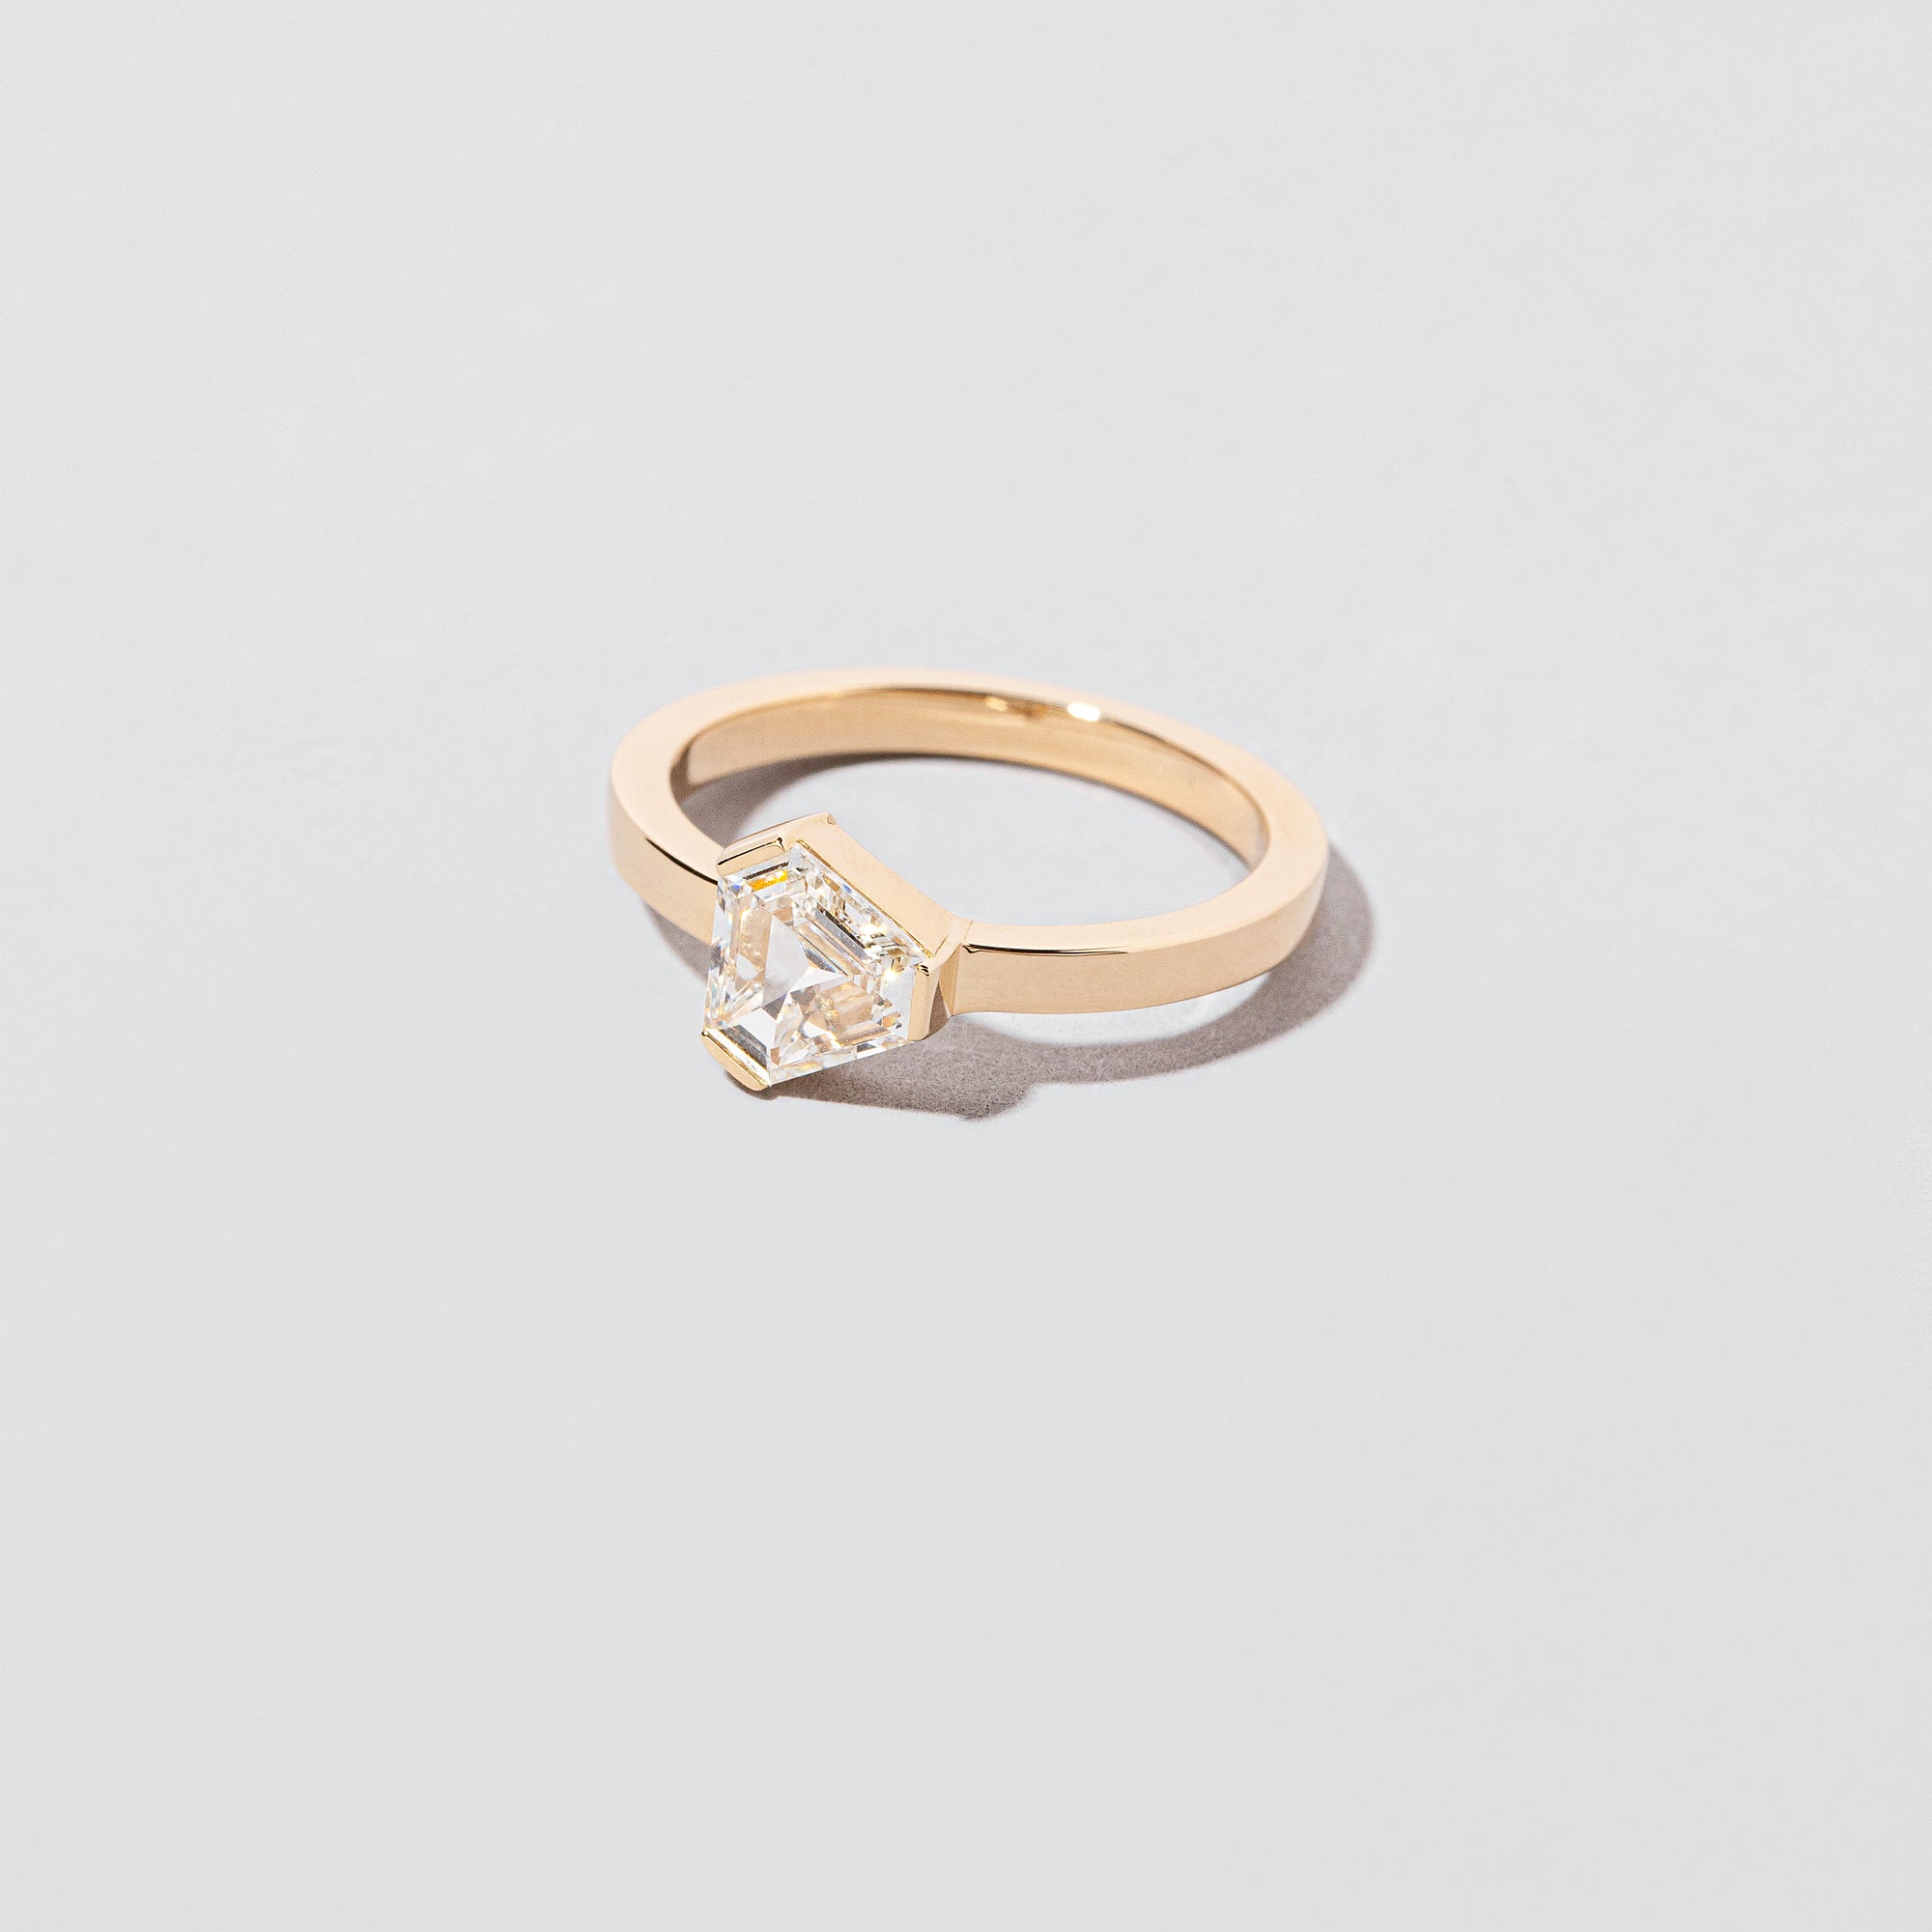 product_details:: Hyperion Ring on light color background.